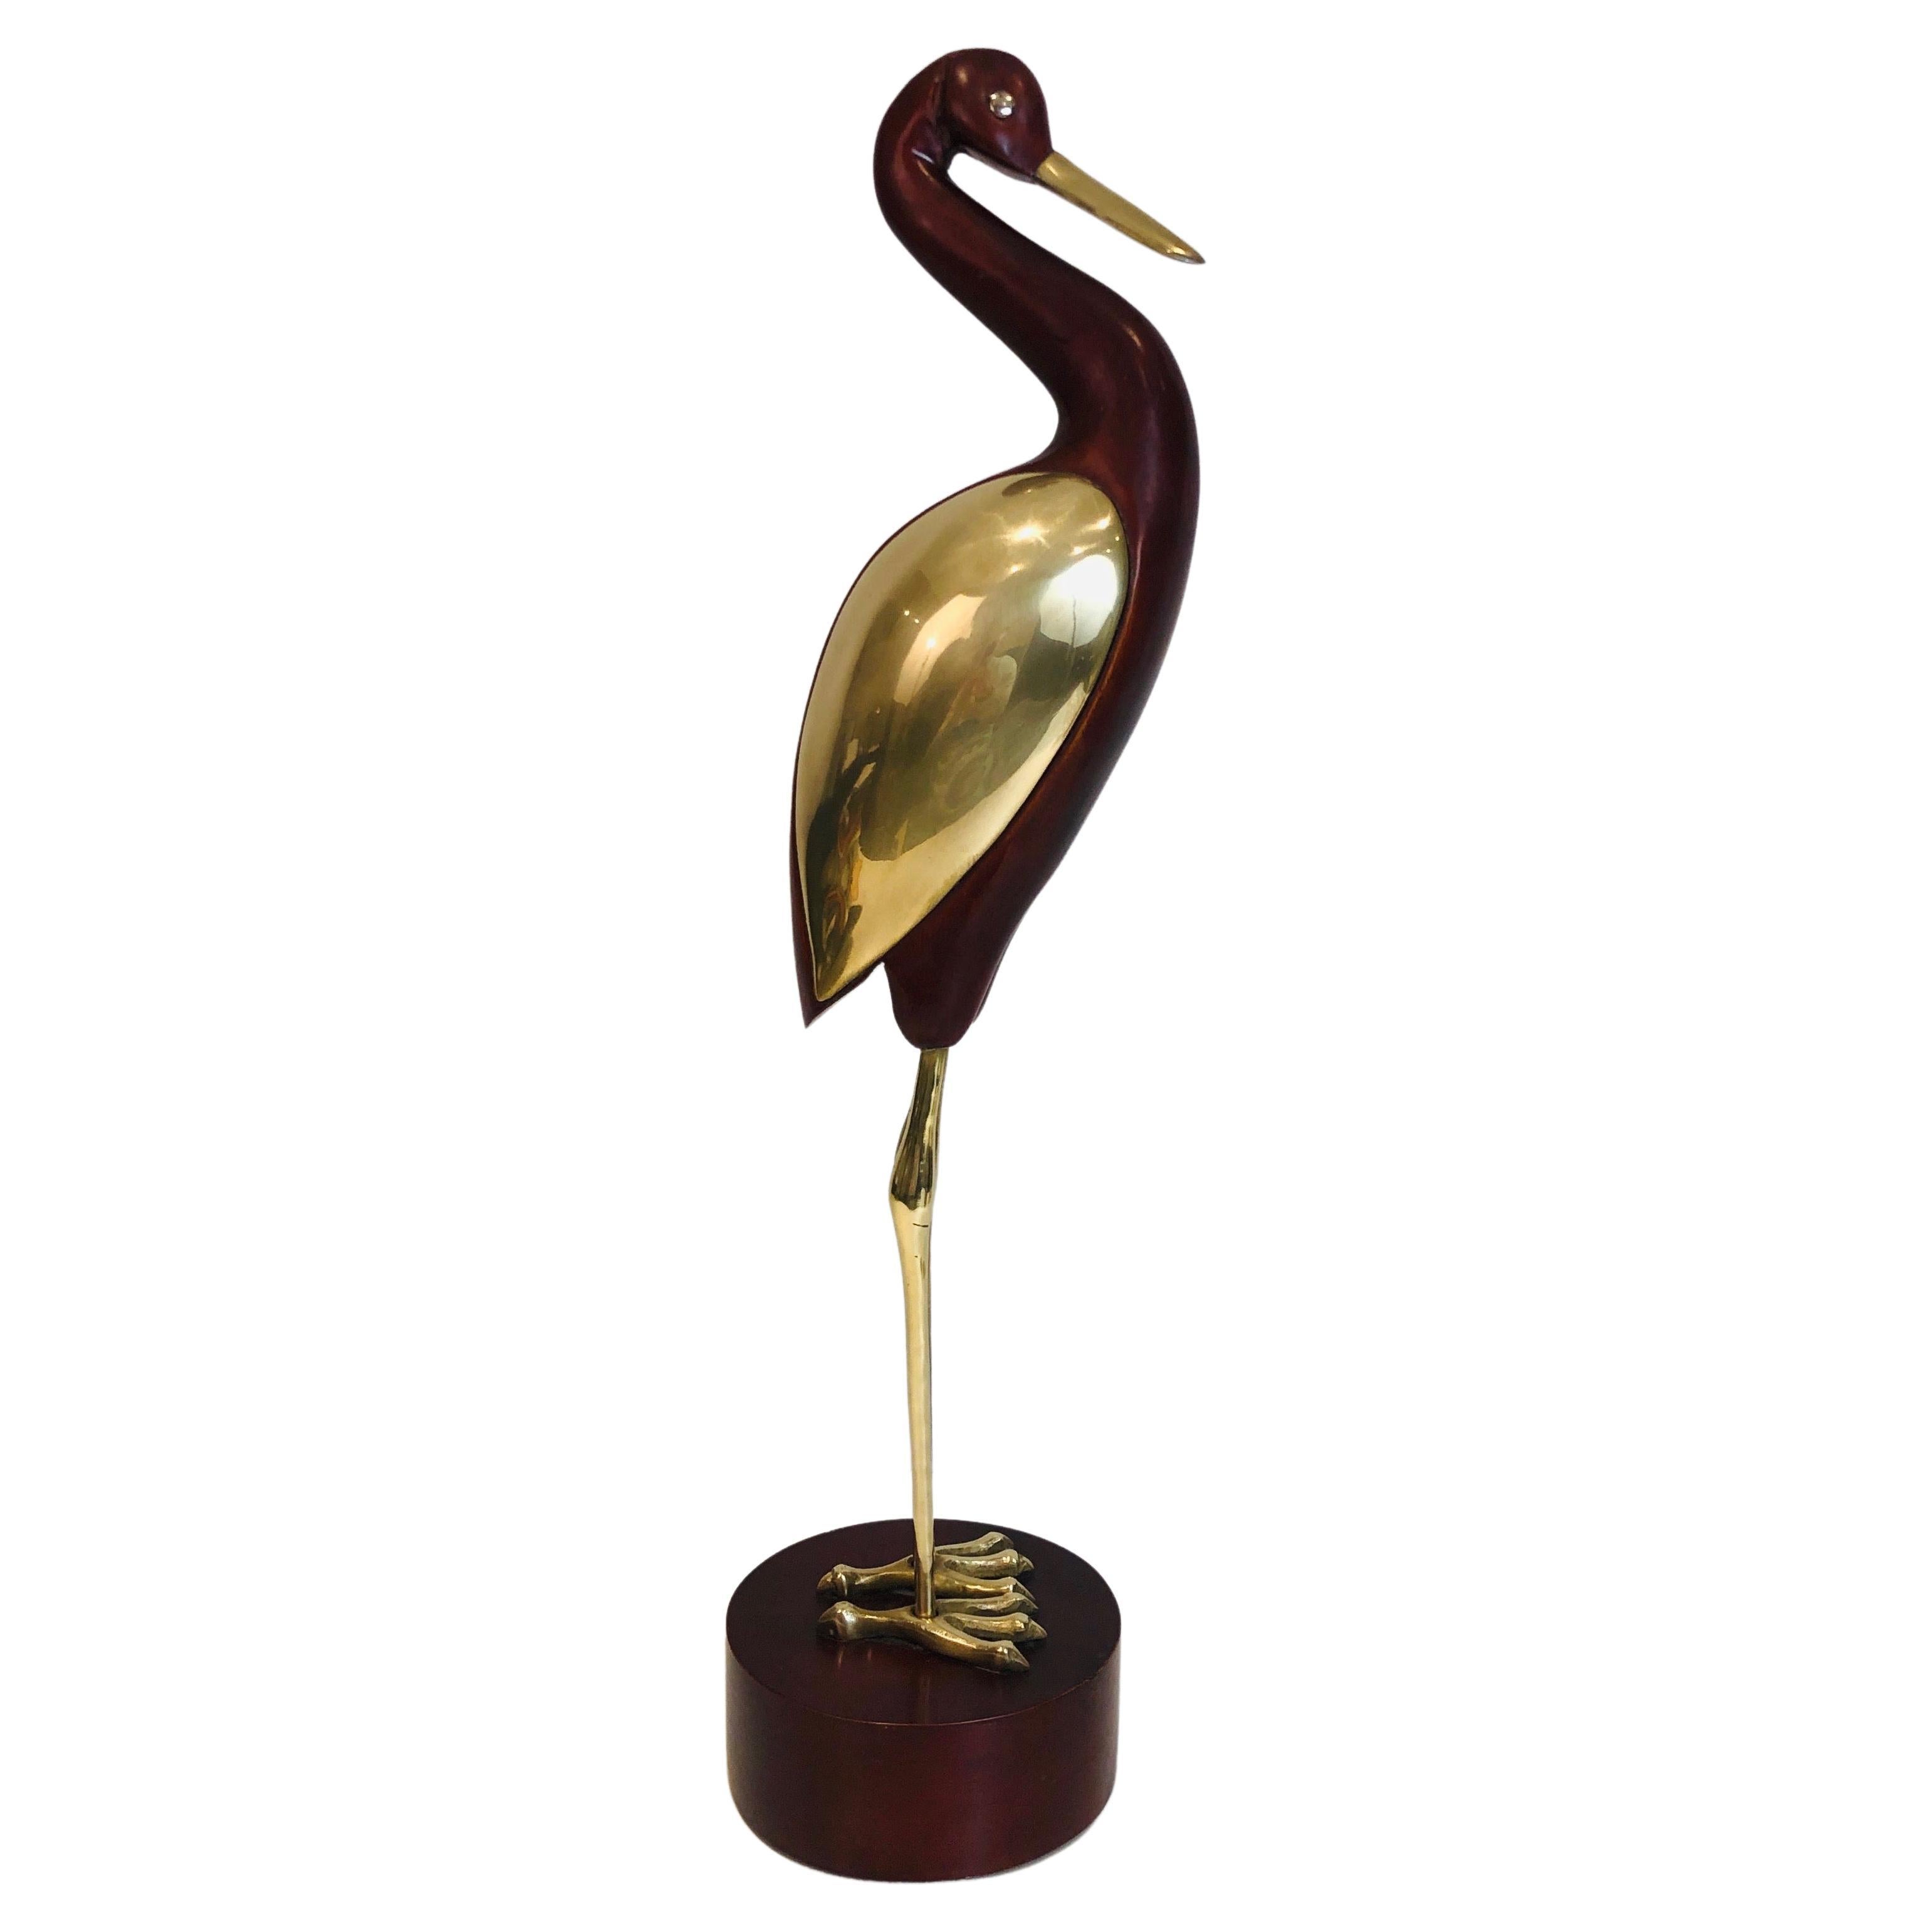 Decorative Exotic Wood and Brass Bird. Restoration on the Neck, French, circa 19